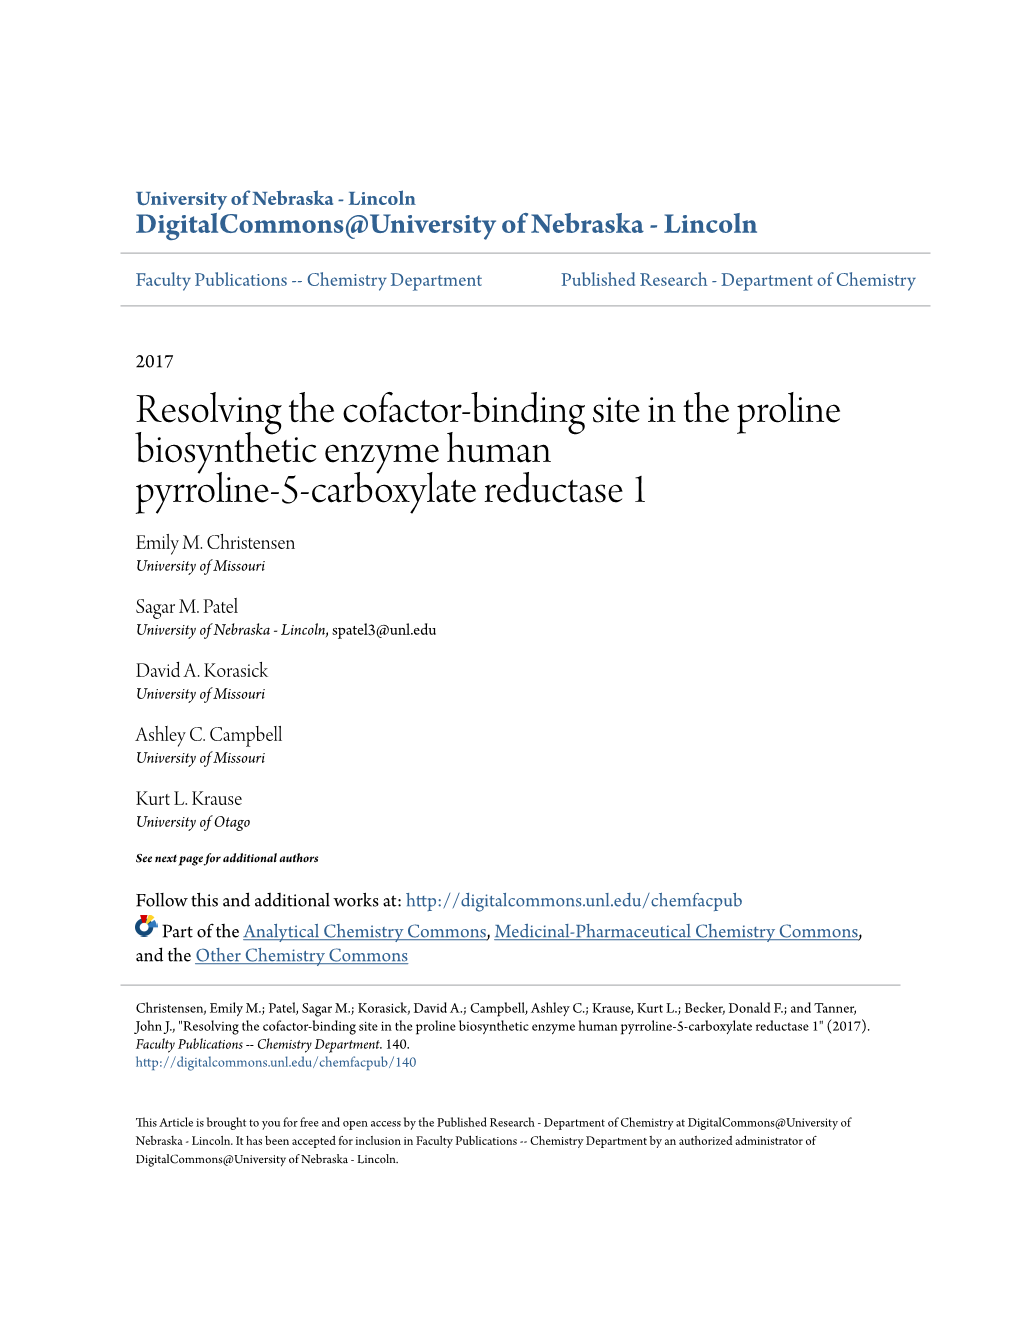 Resolving the Cofactor-Binding Site in the Proline Biosynthetic Enzyme Human Pyrroline-5-Carboxylate Reductase 1 Emily M